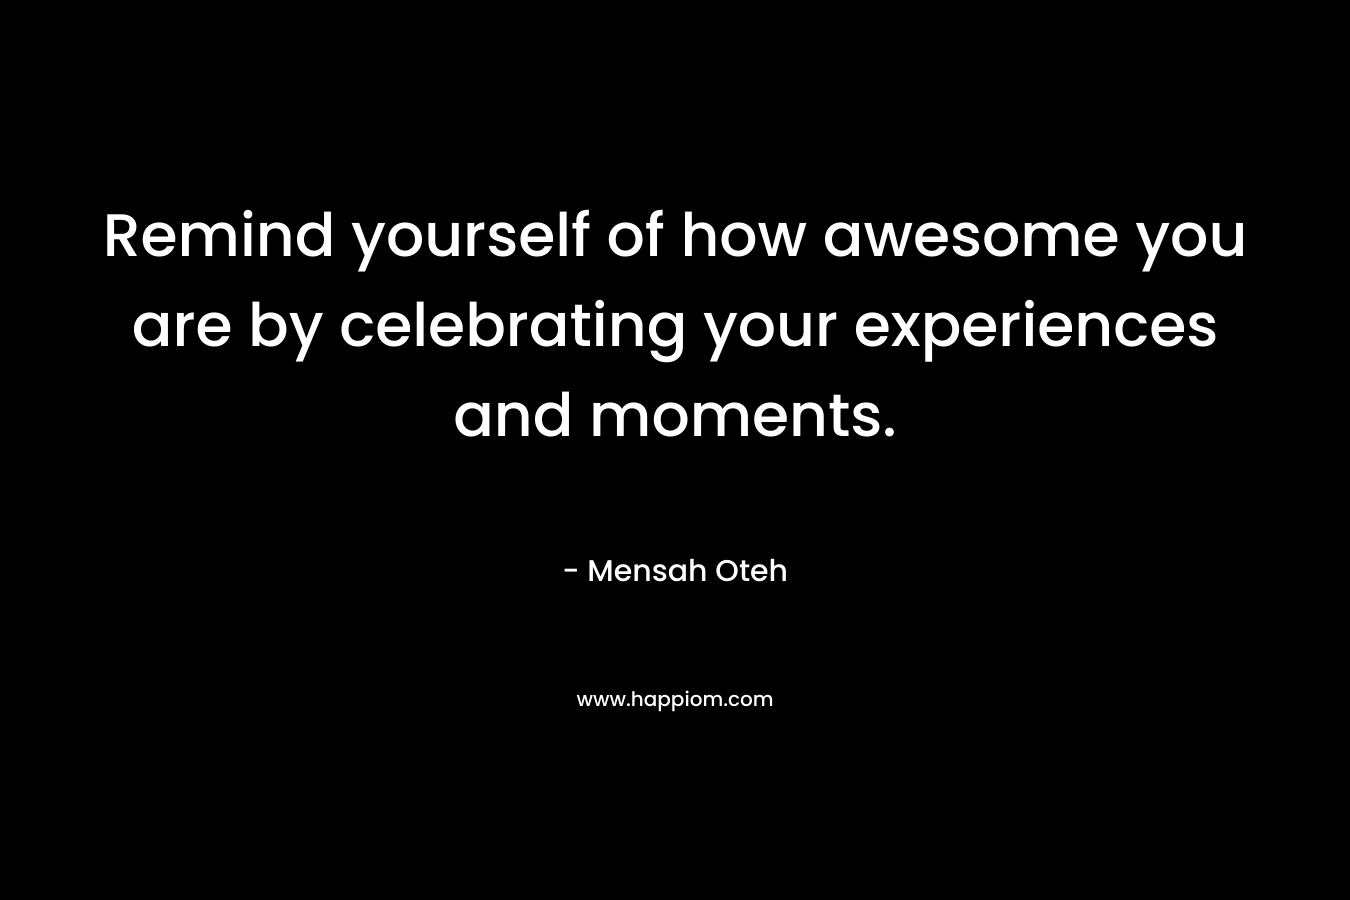 Remind yourself of how awesome you are by celebrating your experiences and moments.